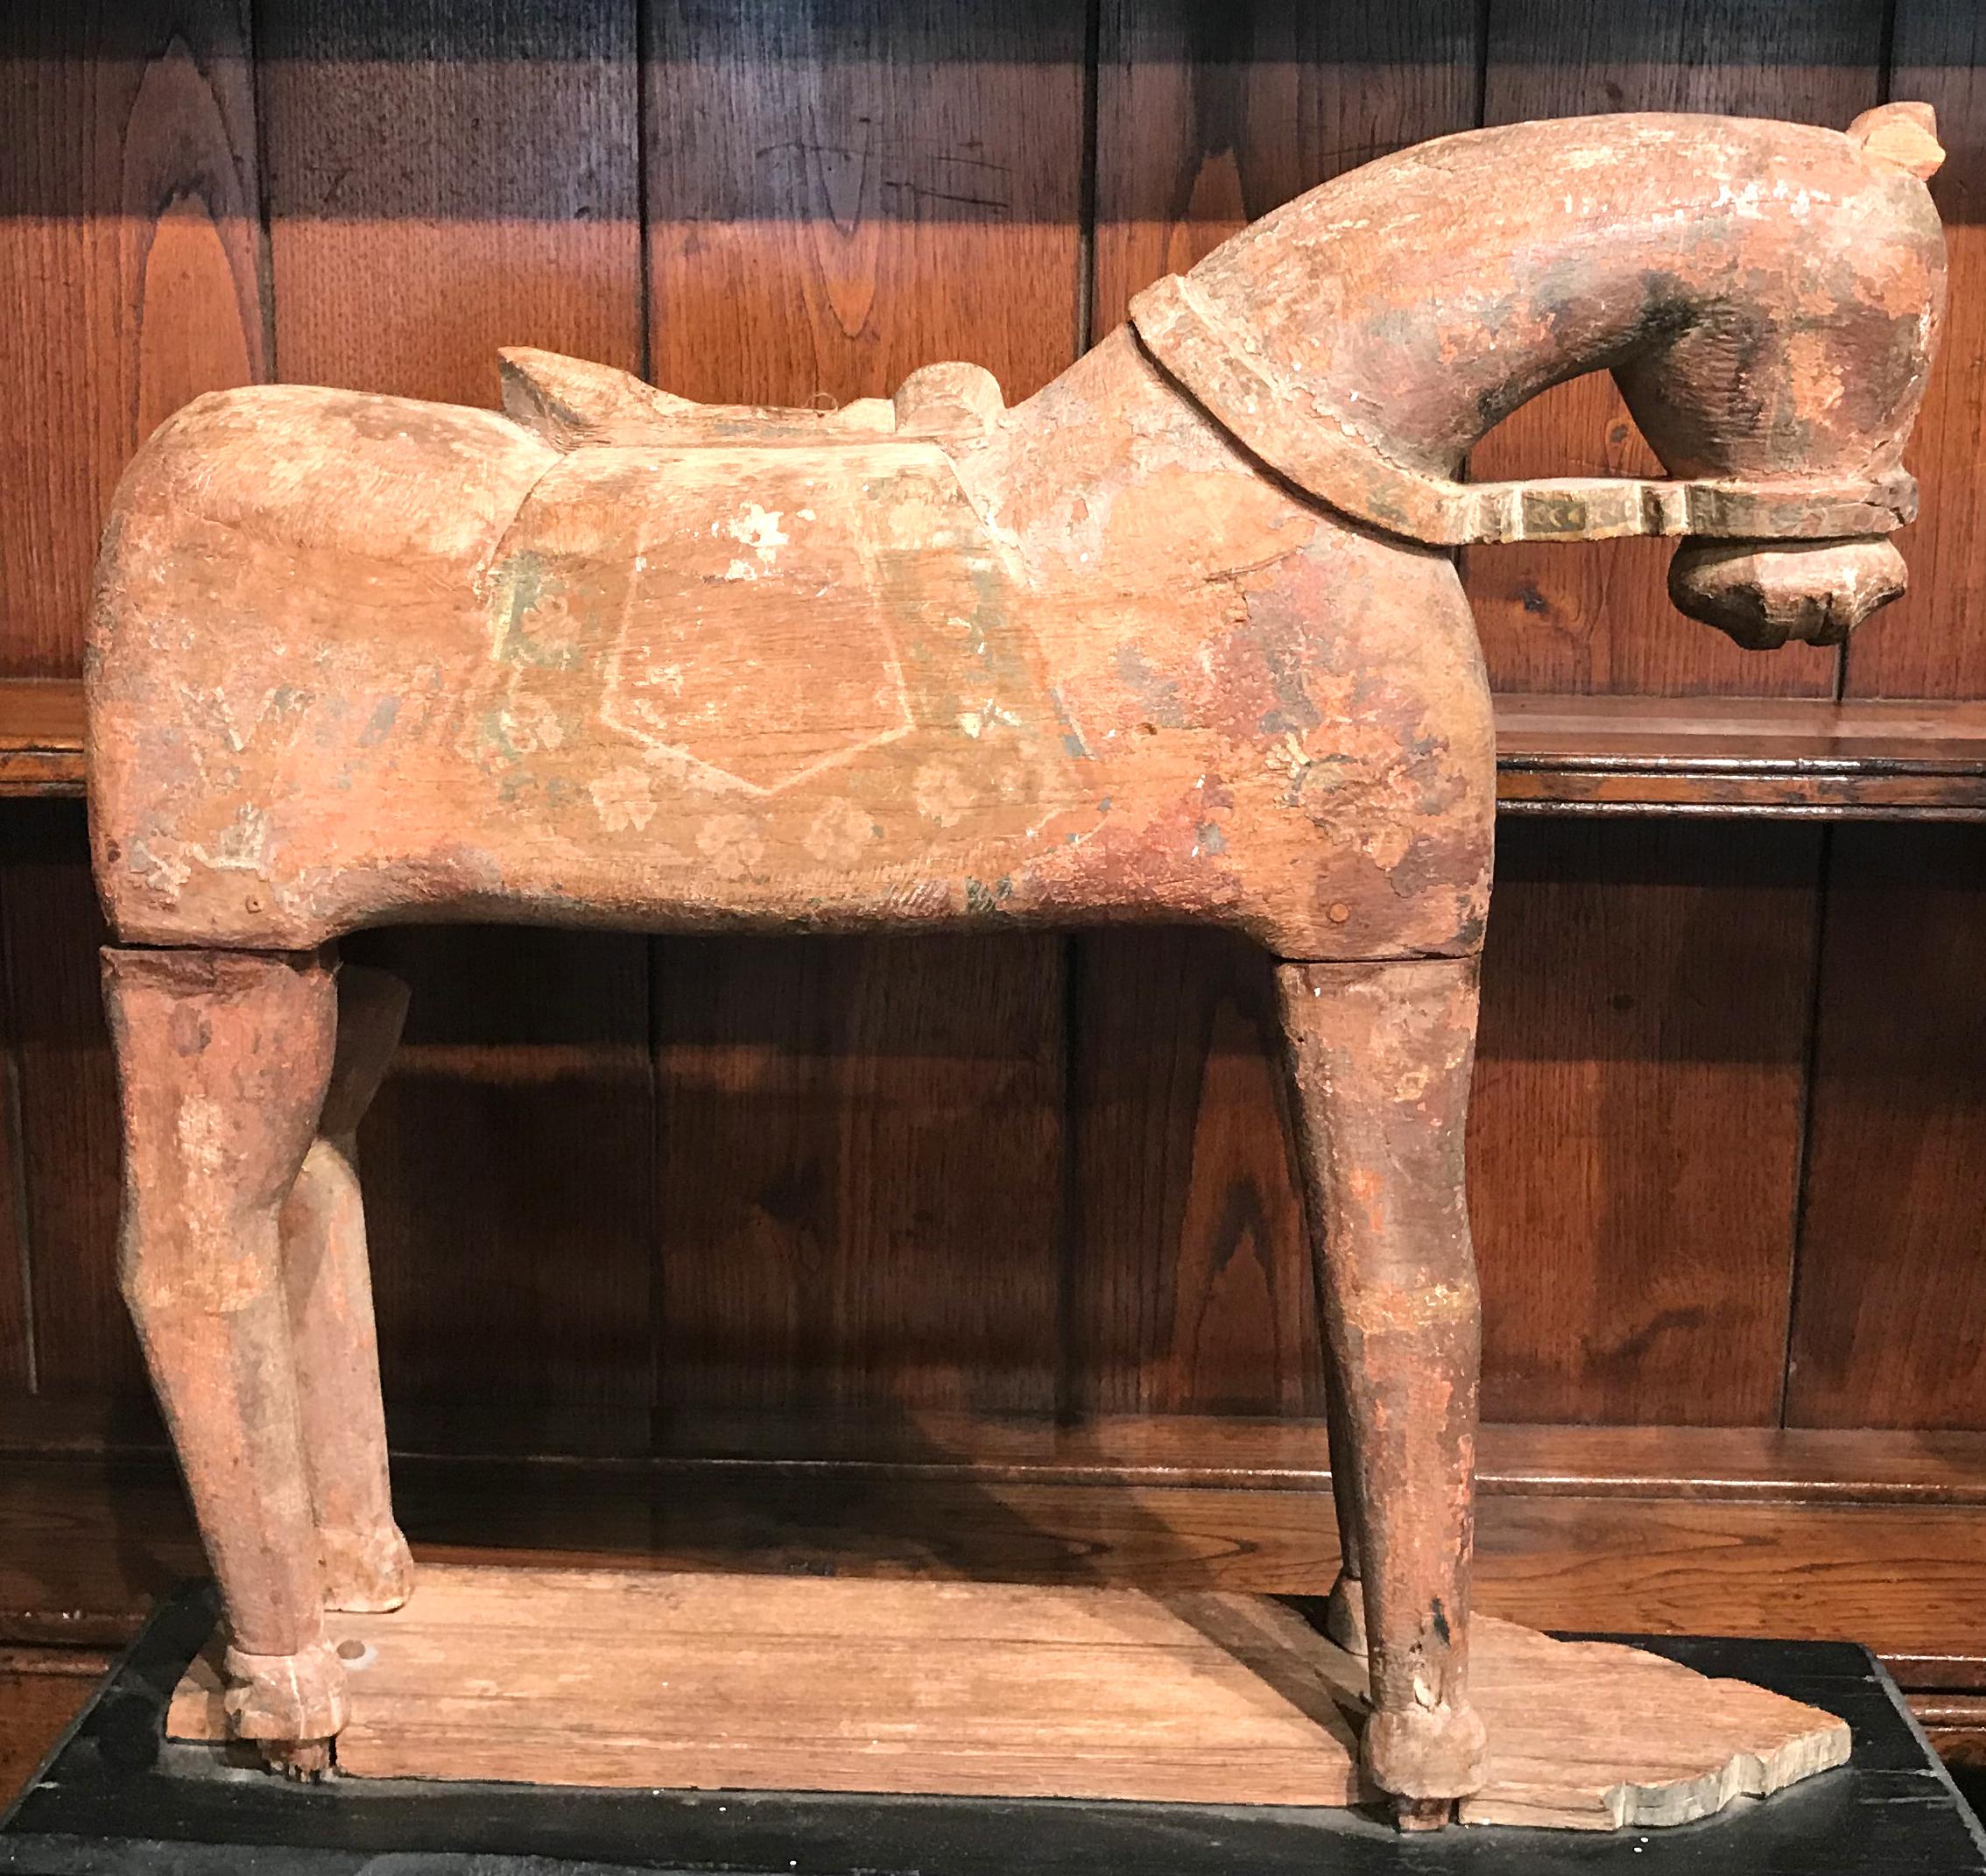 A fine pair of wooden horse elements with polychrome painted decoration, mounted on ebonized wooden plinths with molded panels. Probably Tibetan in origin and dating to the 18th or 19th century. In good overall condition, with high point minor